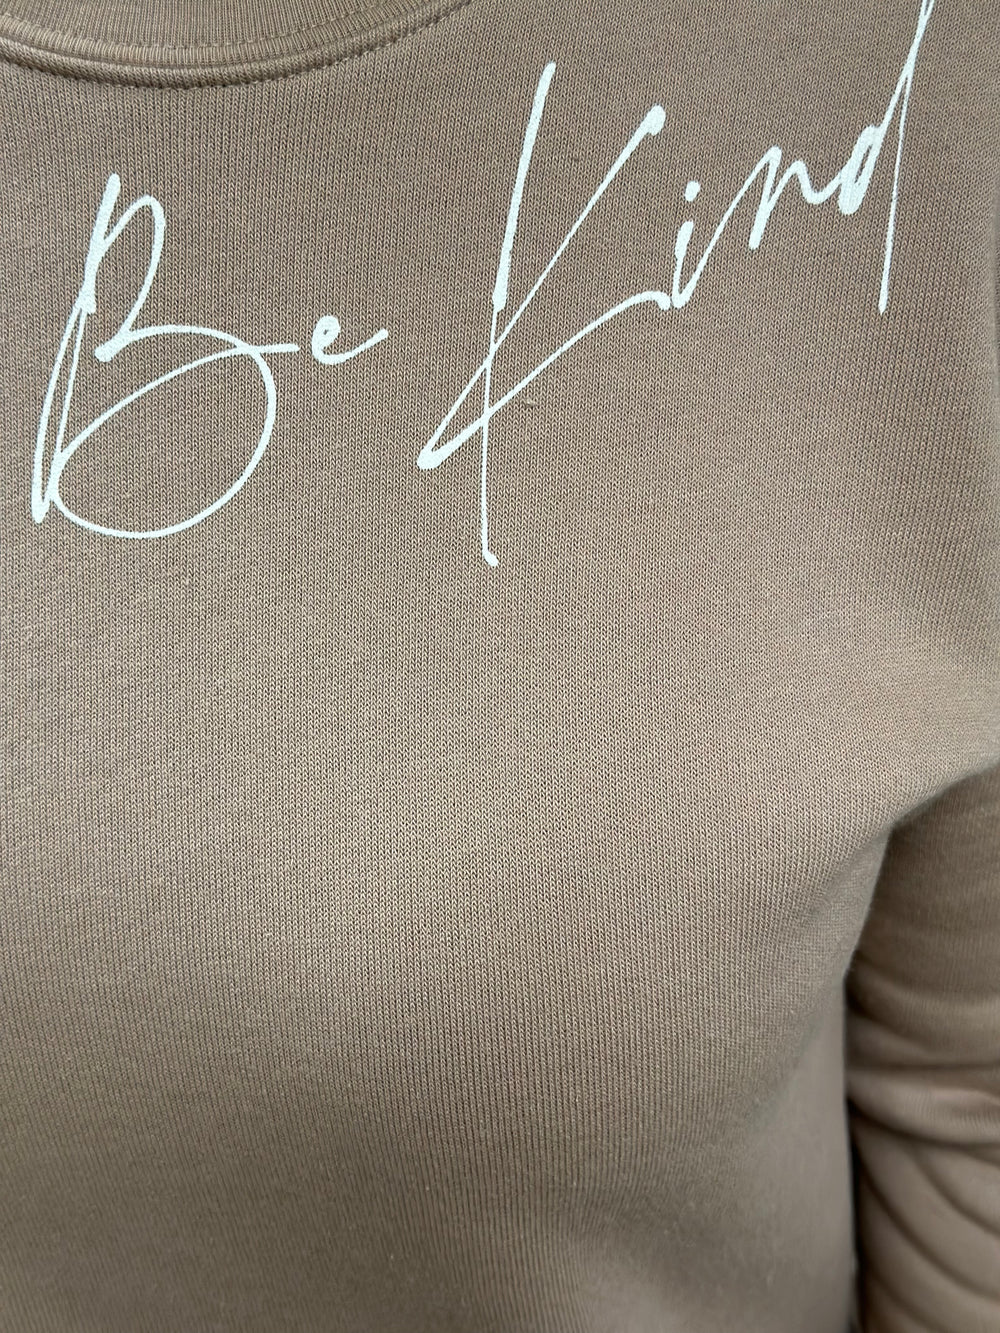 Be Kind Graphic Sweatshirt-Graphic Sweaters-Oat Collective-Evergreen Boutique, Women’s Fashion Boutique in Santa Claus, Indiana